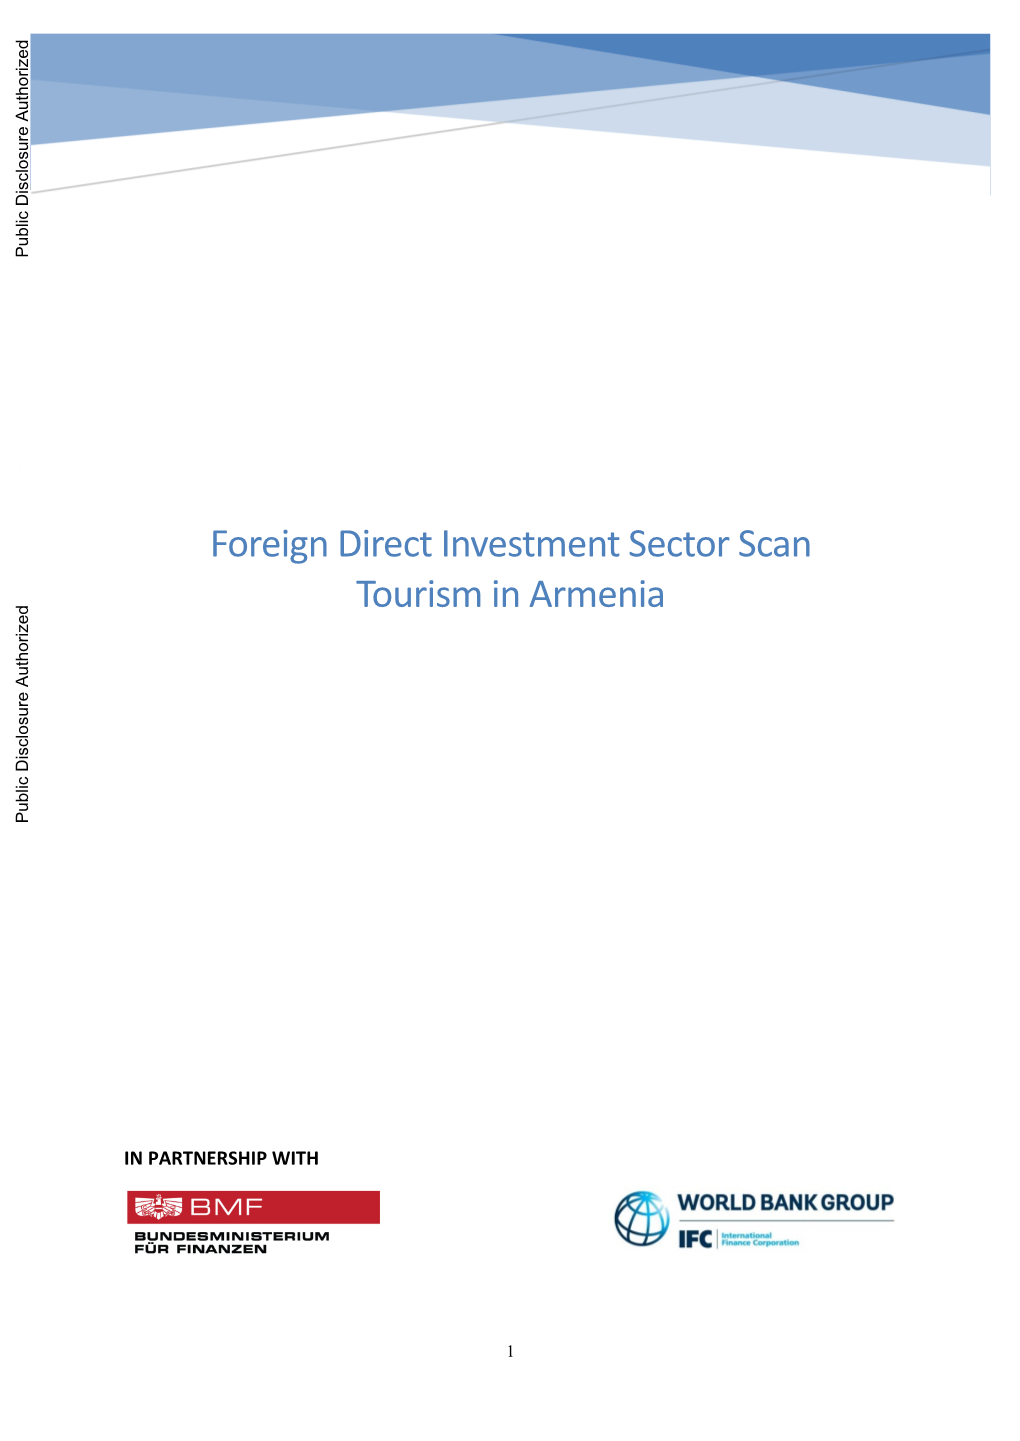 Foreign Direct Investment Sector Scan Tourism in Armenia